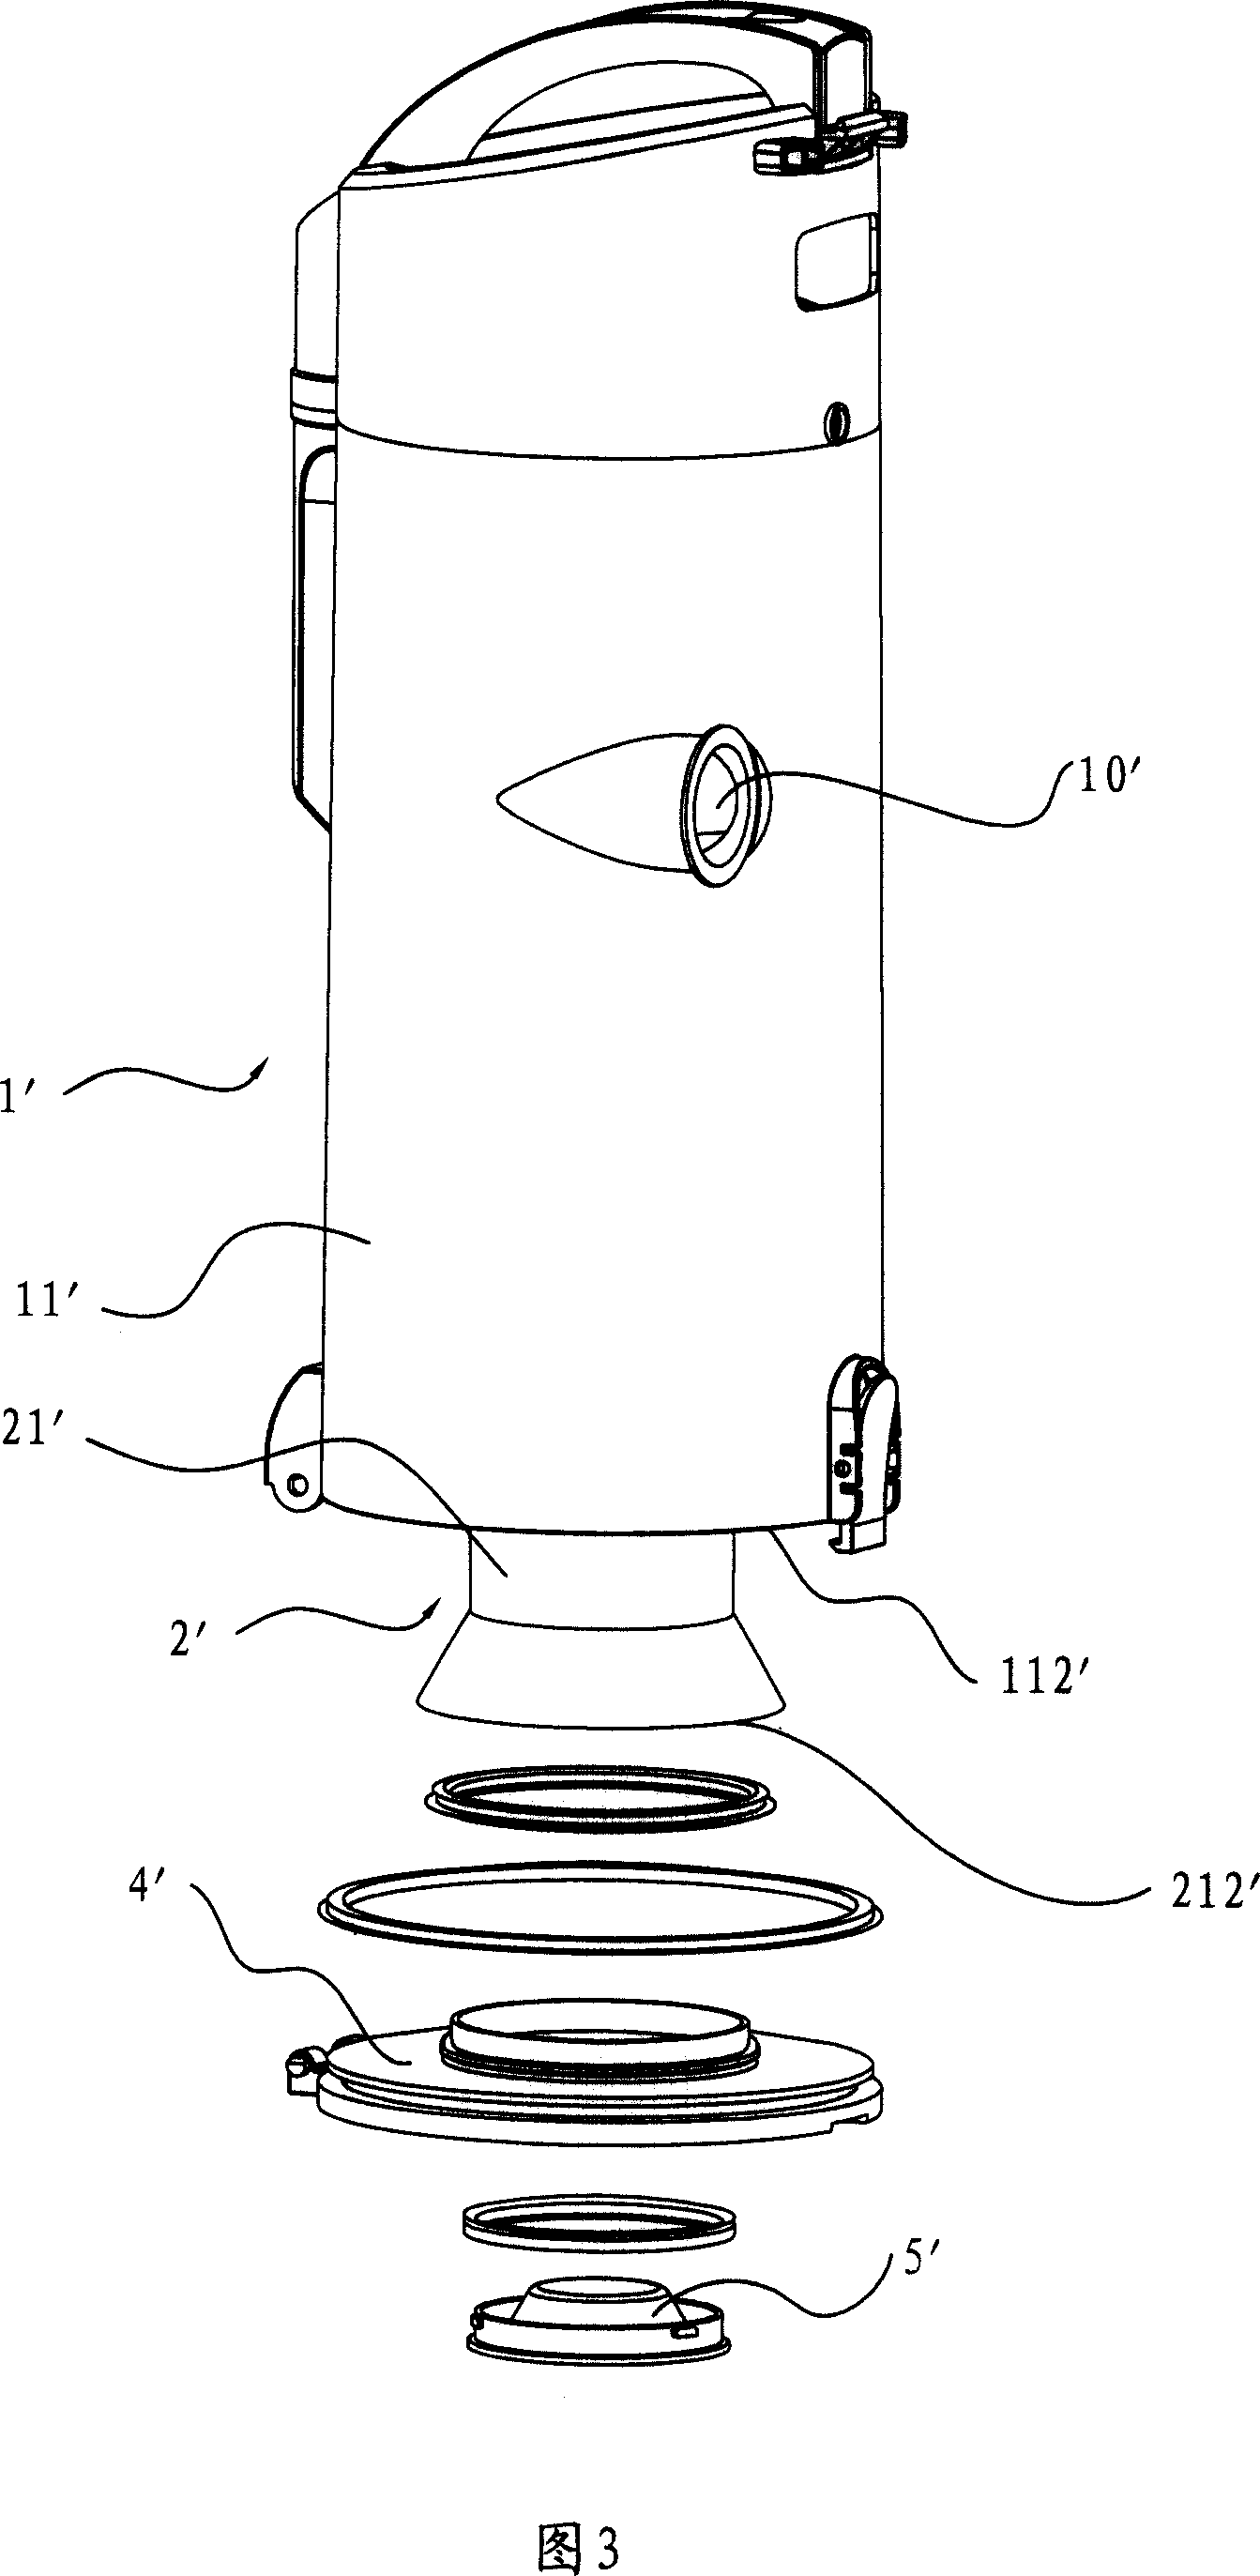 Multi-stage whirlwind separating device of vacuum cleaner